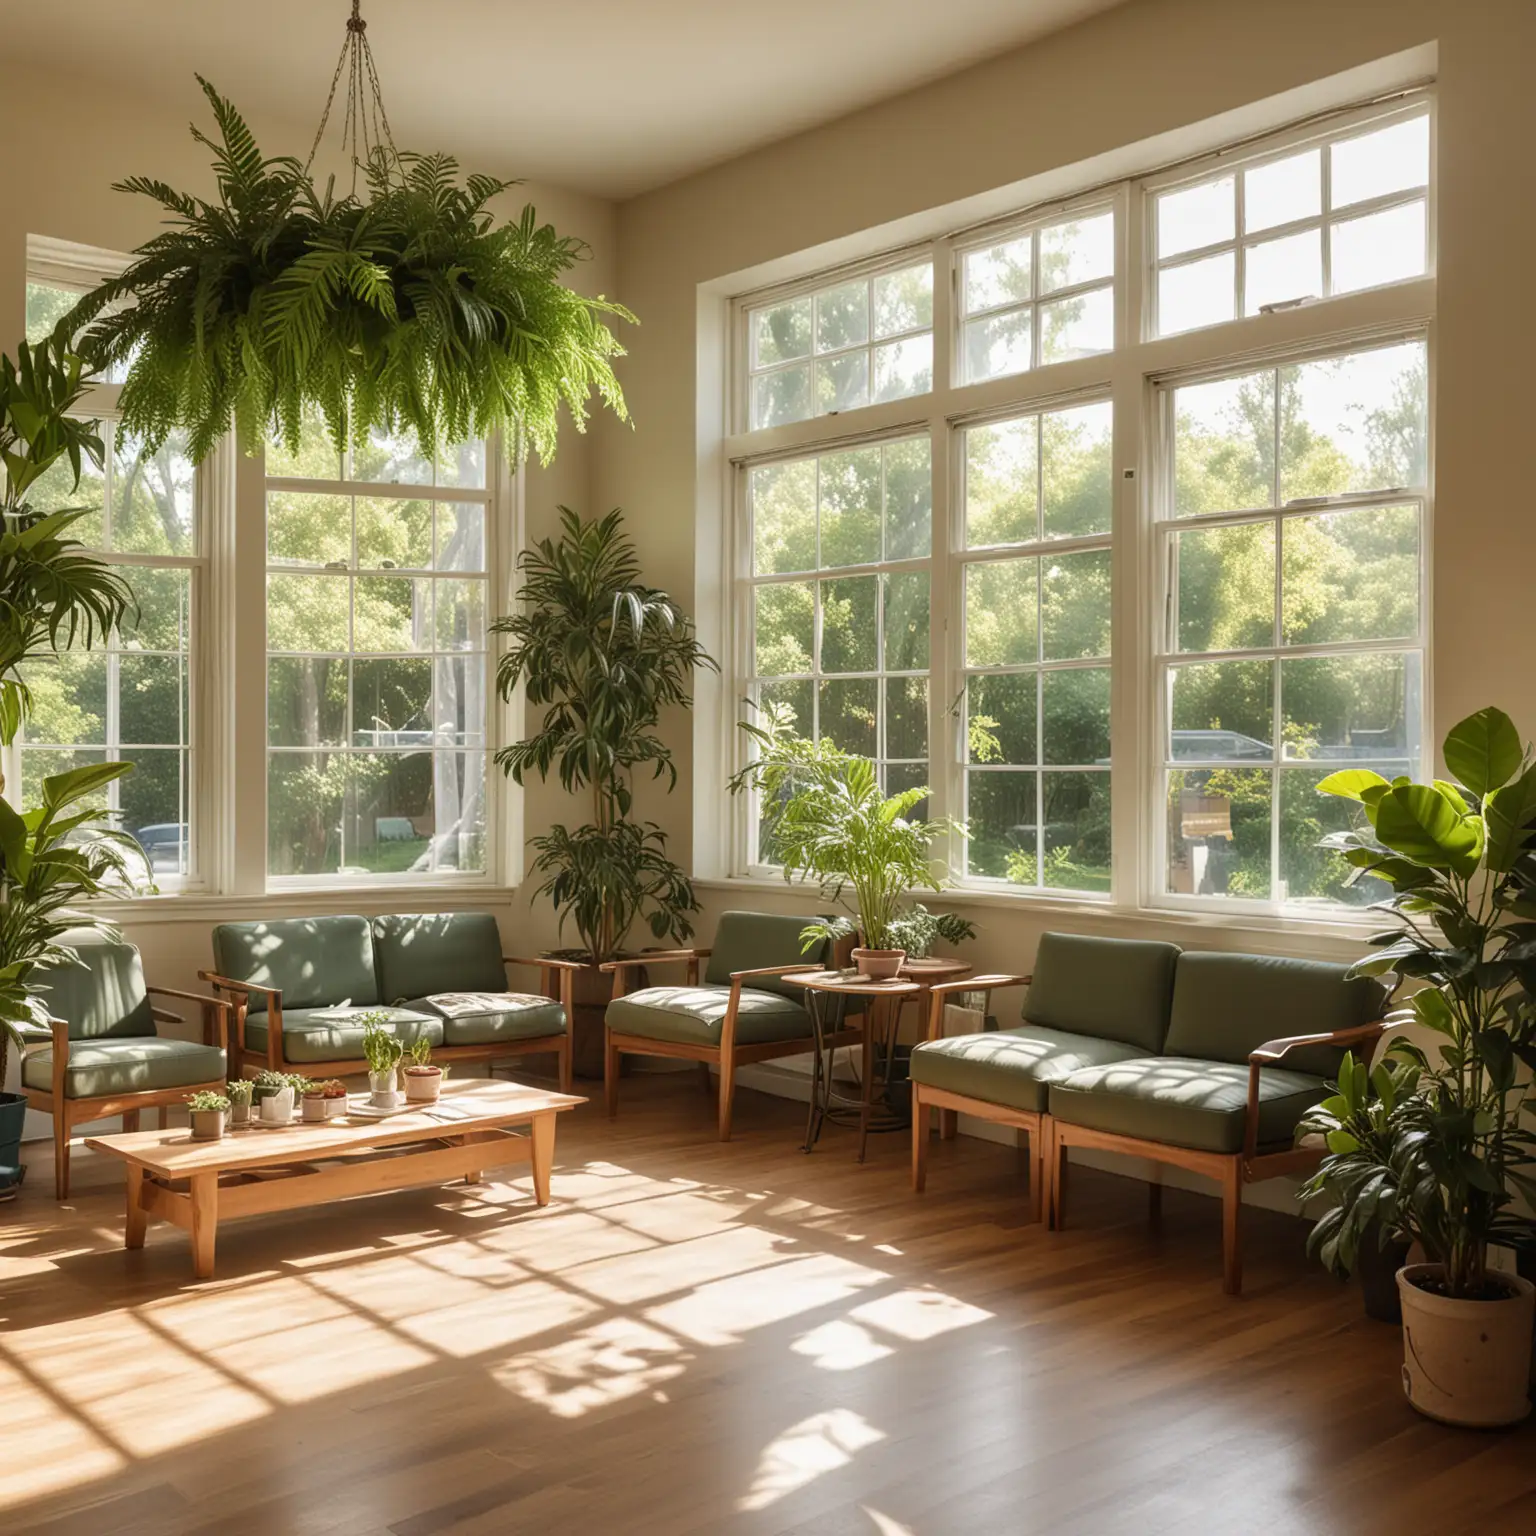 Generate an image of a vibrant teachers lounge bathed in bright sunlight streaming through large windows. The room is filled with lush greenery, with potted plants lining the windowsills and scattered throughout the space. The sunlight casts soft, dappled shadows on the comfortable seating areas and wooden floors. Teachers are seen lounging in cozy chairs, engaged in lively conversations or quietly grading papers. The atmosphere is relaxed and inviting, with the natural elements and sunlight creating a refreshing and rejuvenating ambiance. Capture the serenity and warmth of a teachers lounge filled with sunlight and surrounded by lush plants.